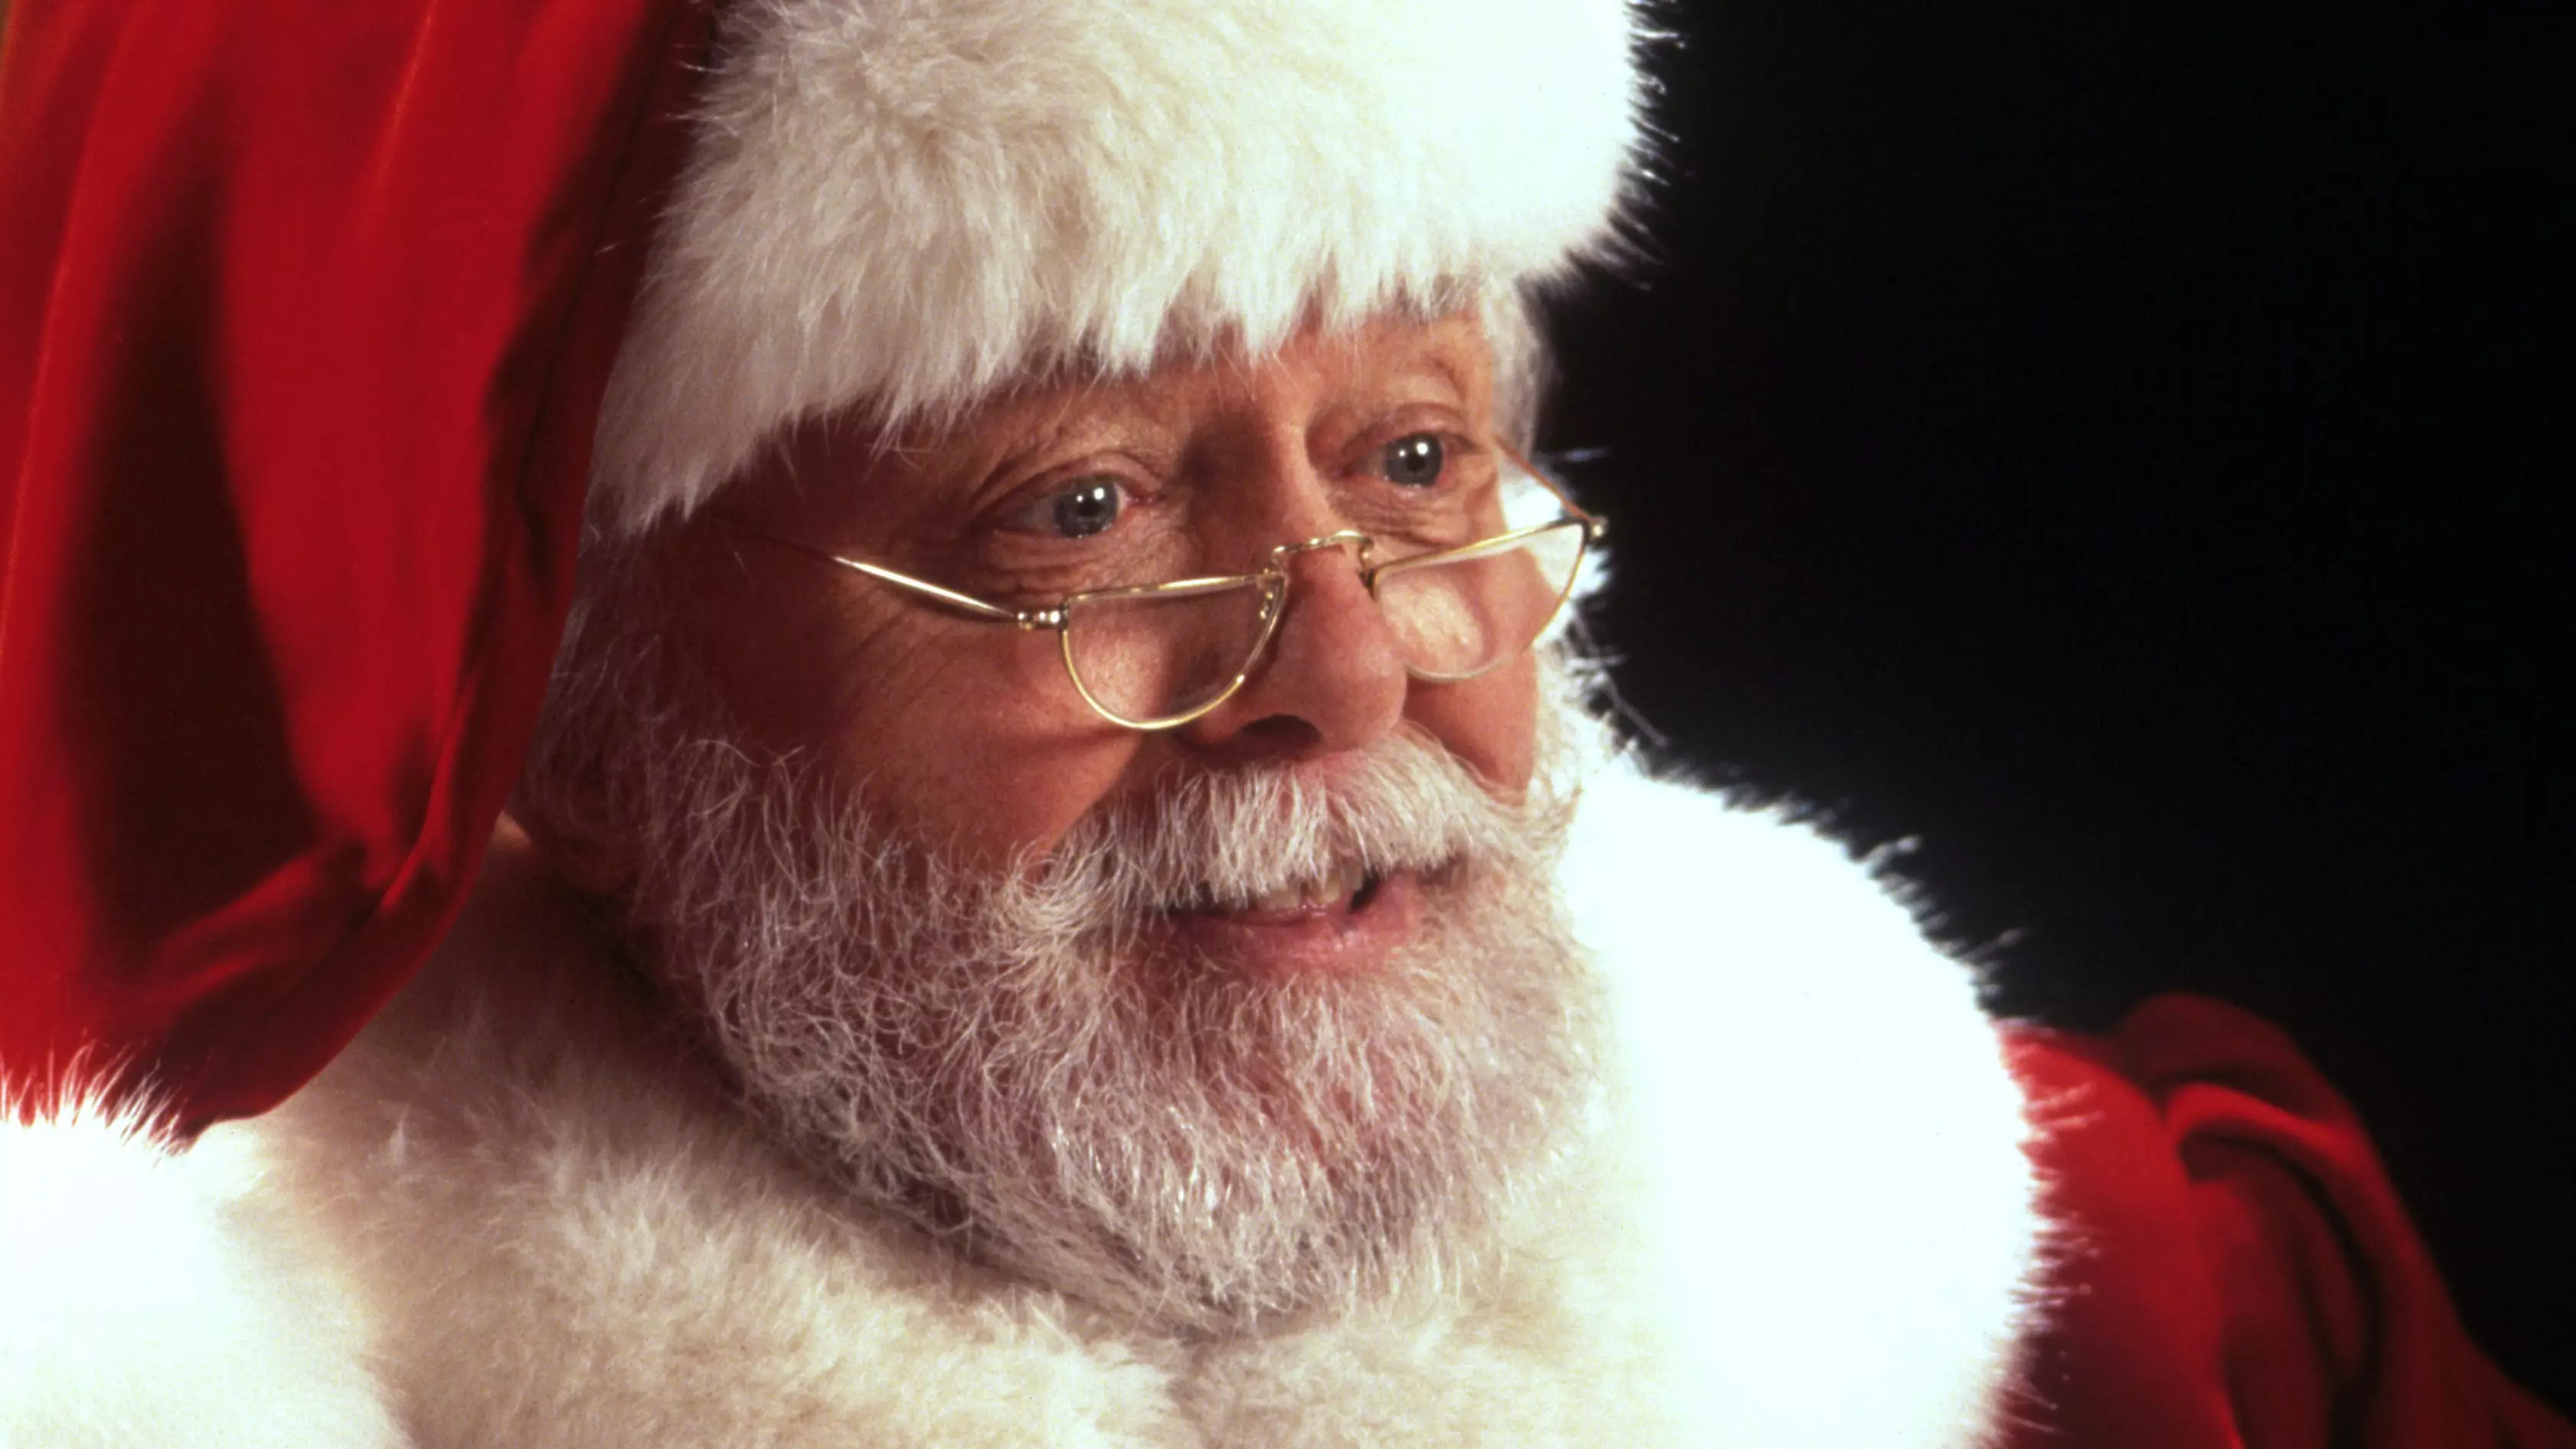 Richard Attenborough In Miracle On 34th Street Is The Most Believable Santa, Study Finds